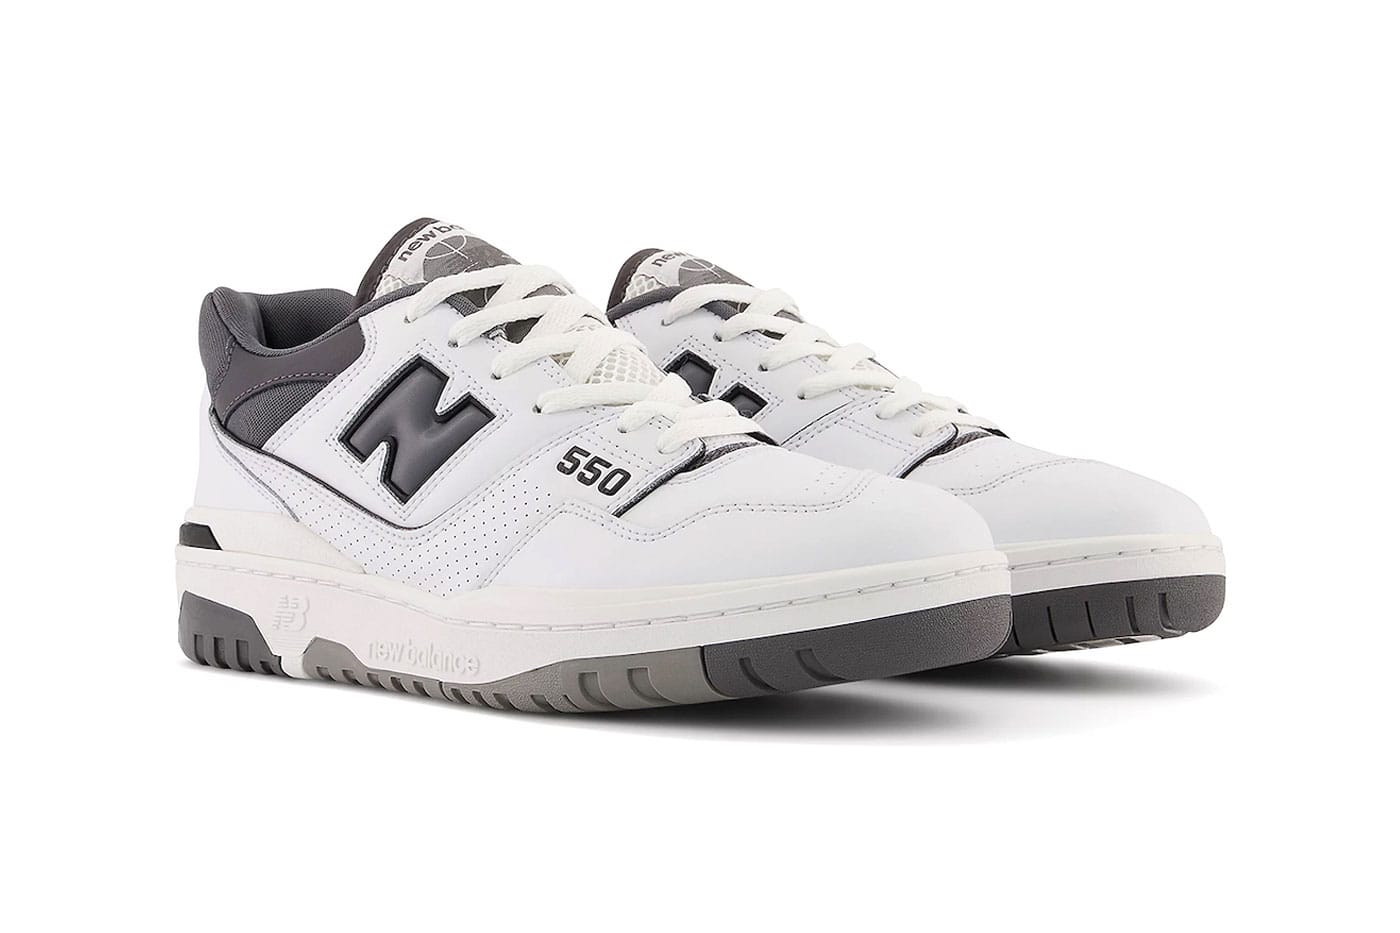 New Balance's 550 Resurfaces in 